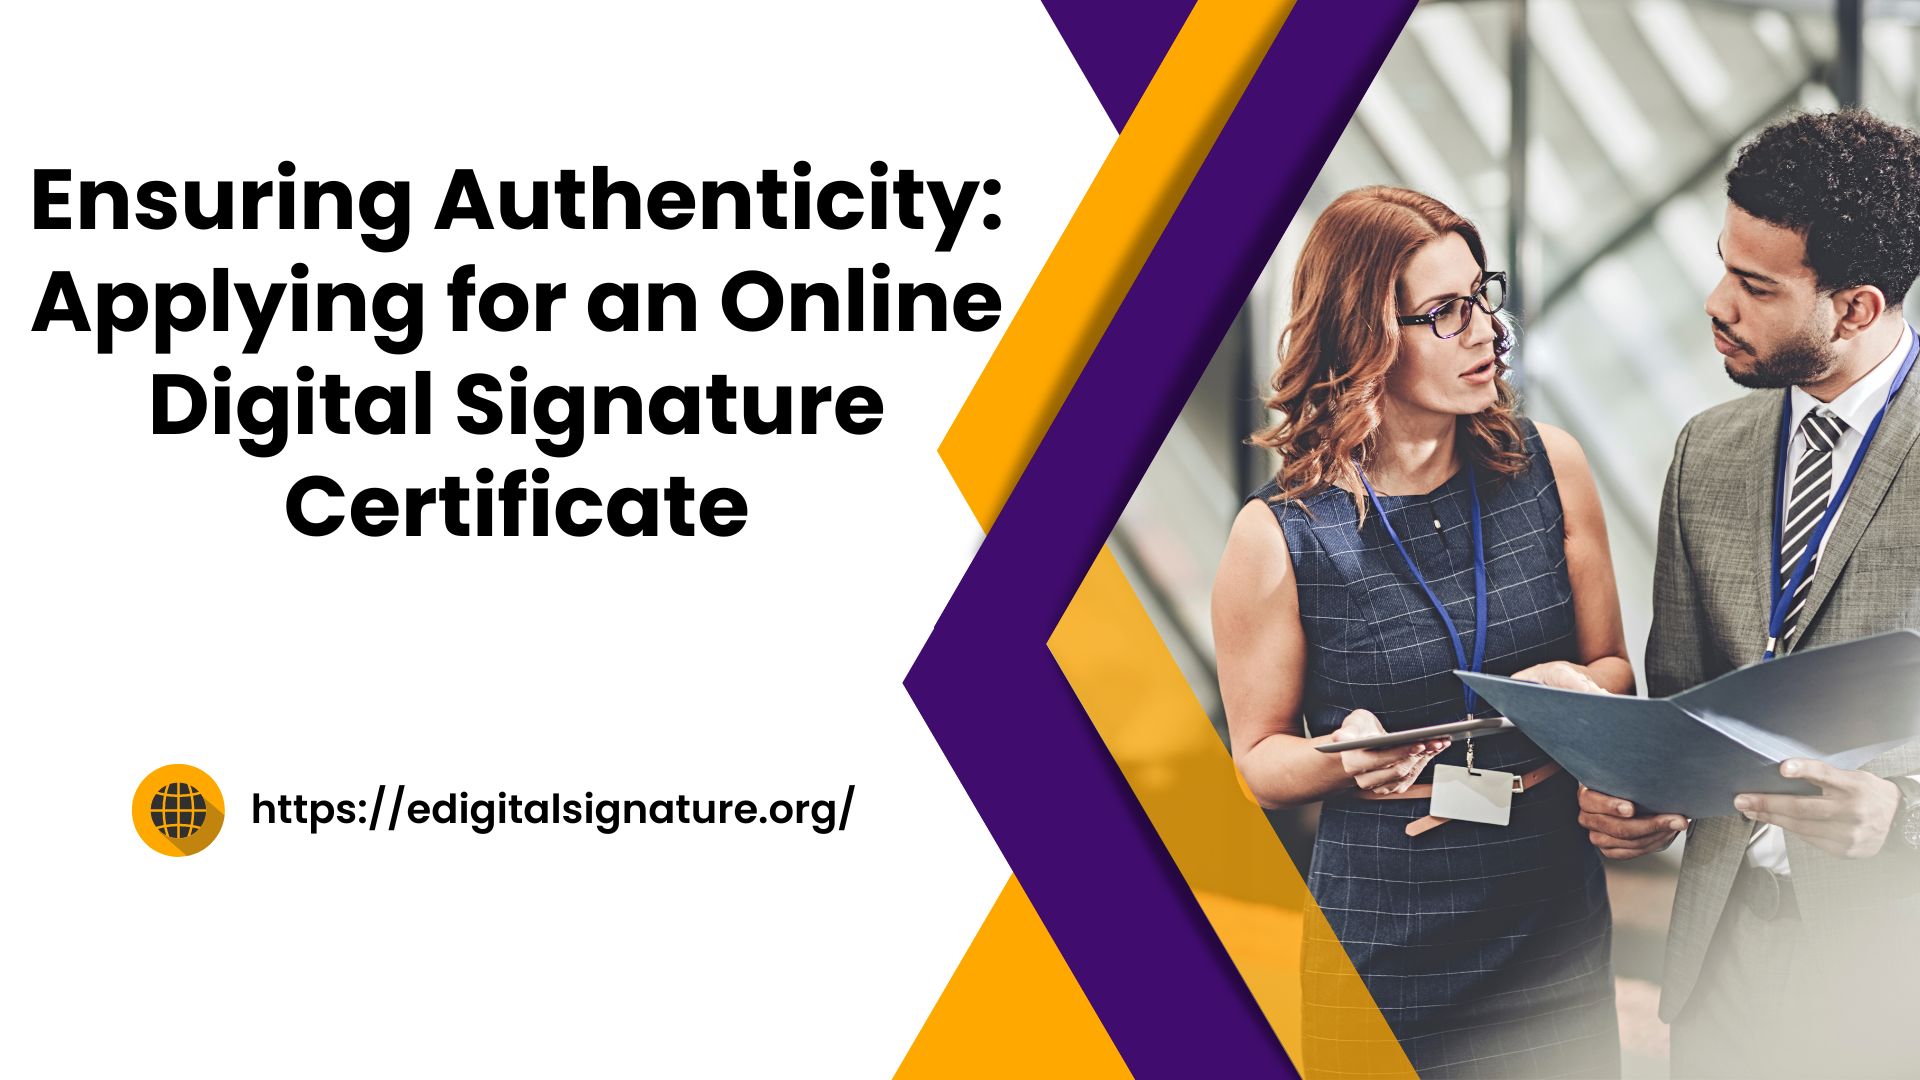 Ensuring Authenticity: Applying for an Online Digital Signature Certificate